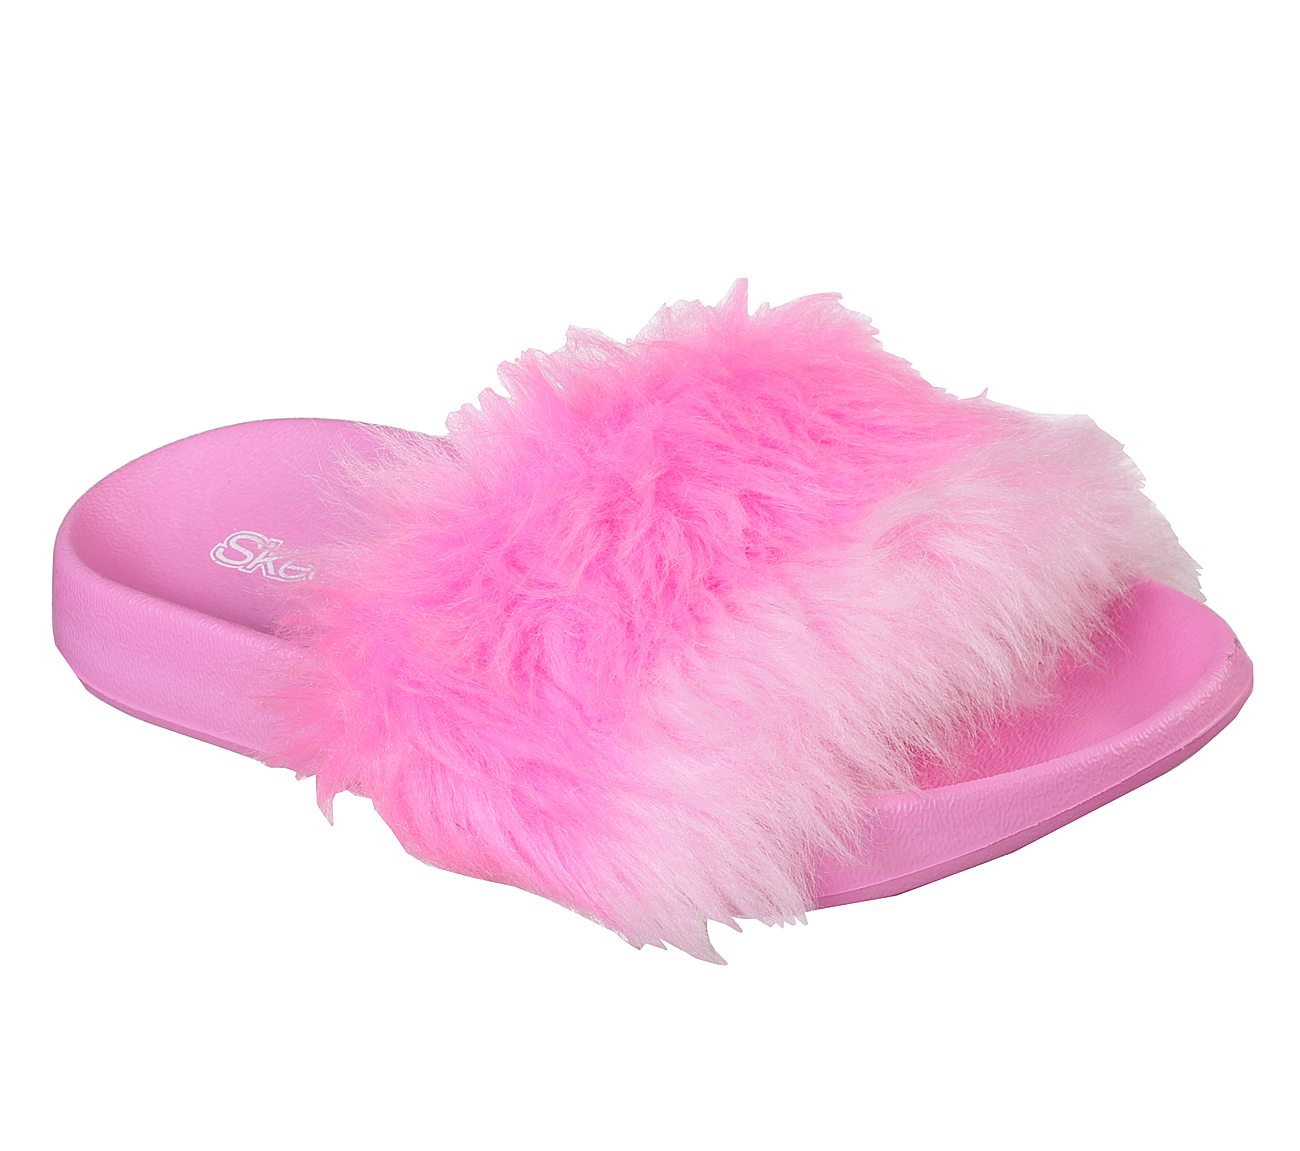 SKECHERS Fur Sunny Slides USA Casuals Shoes